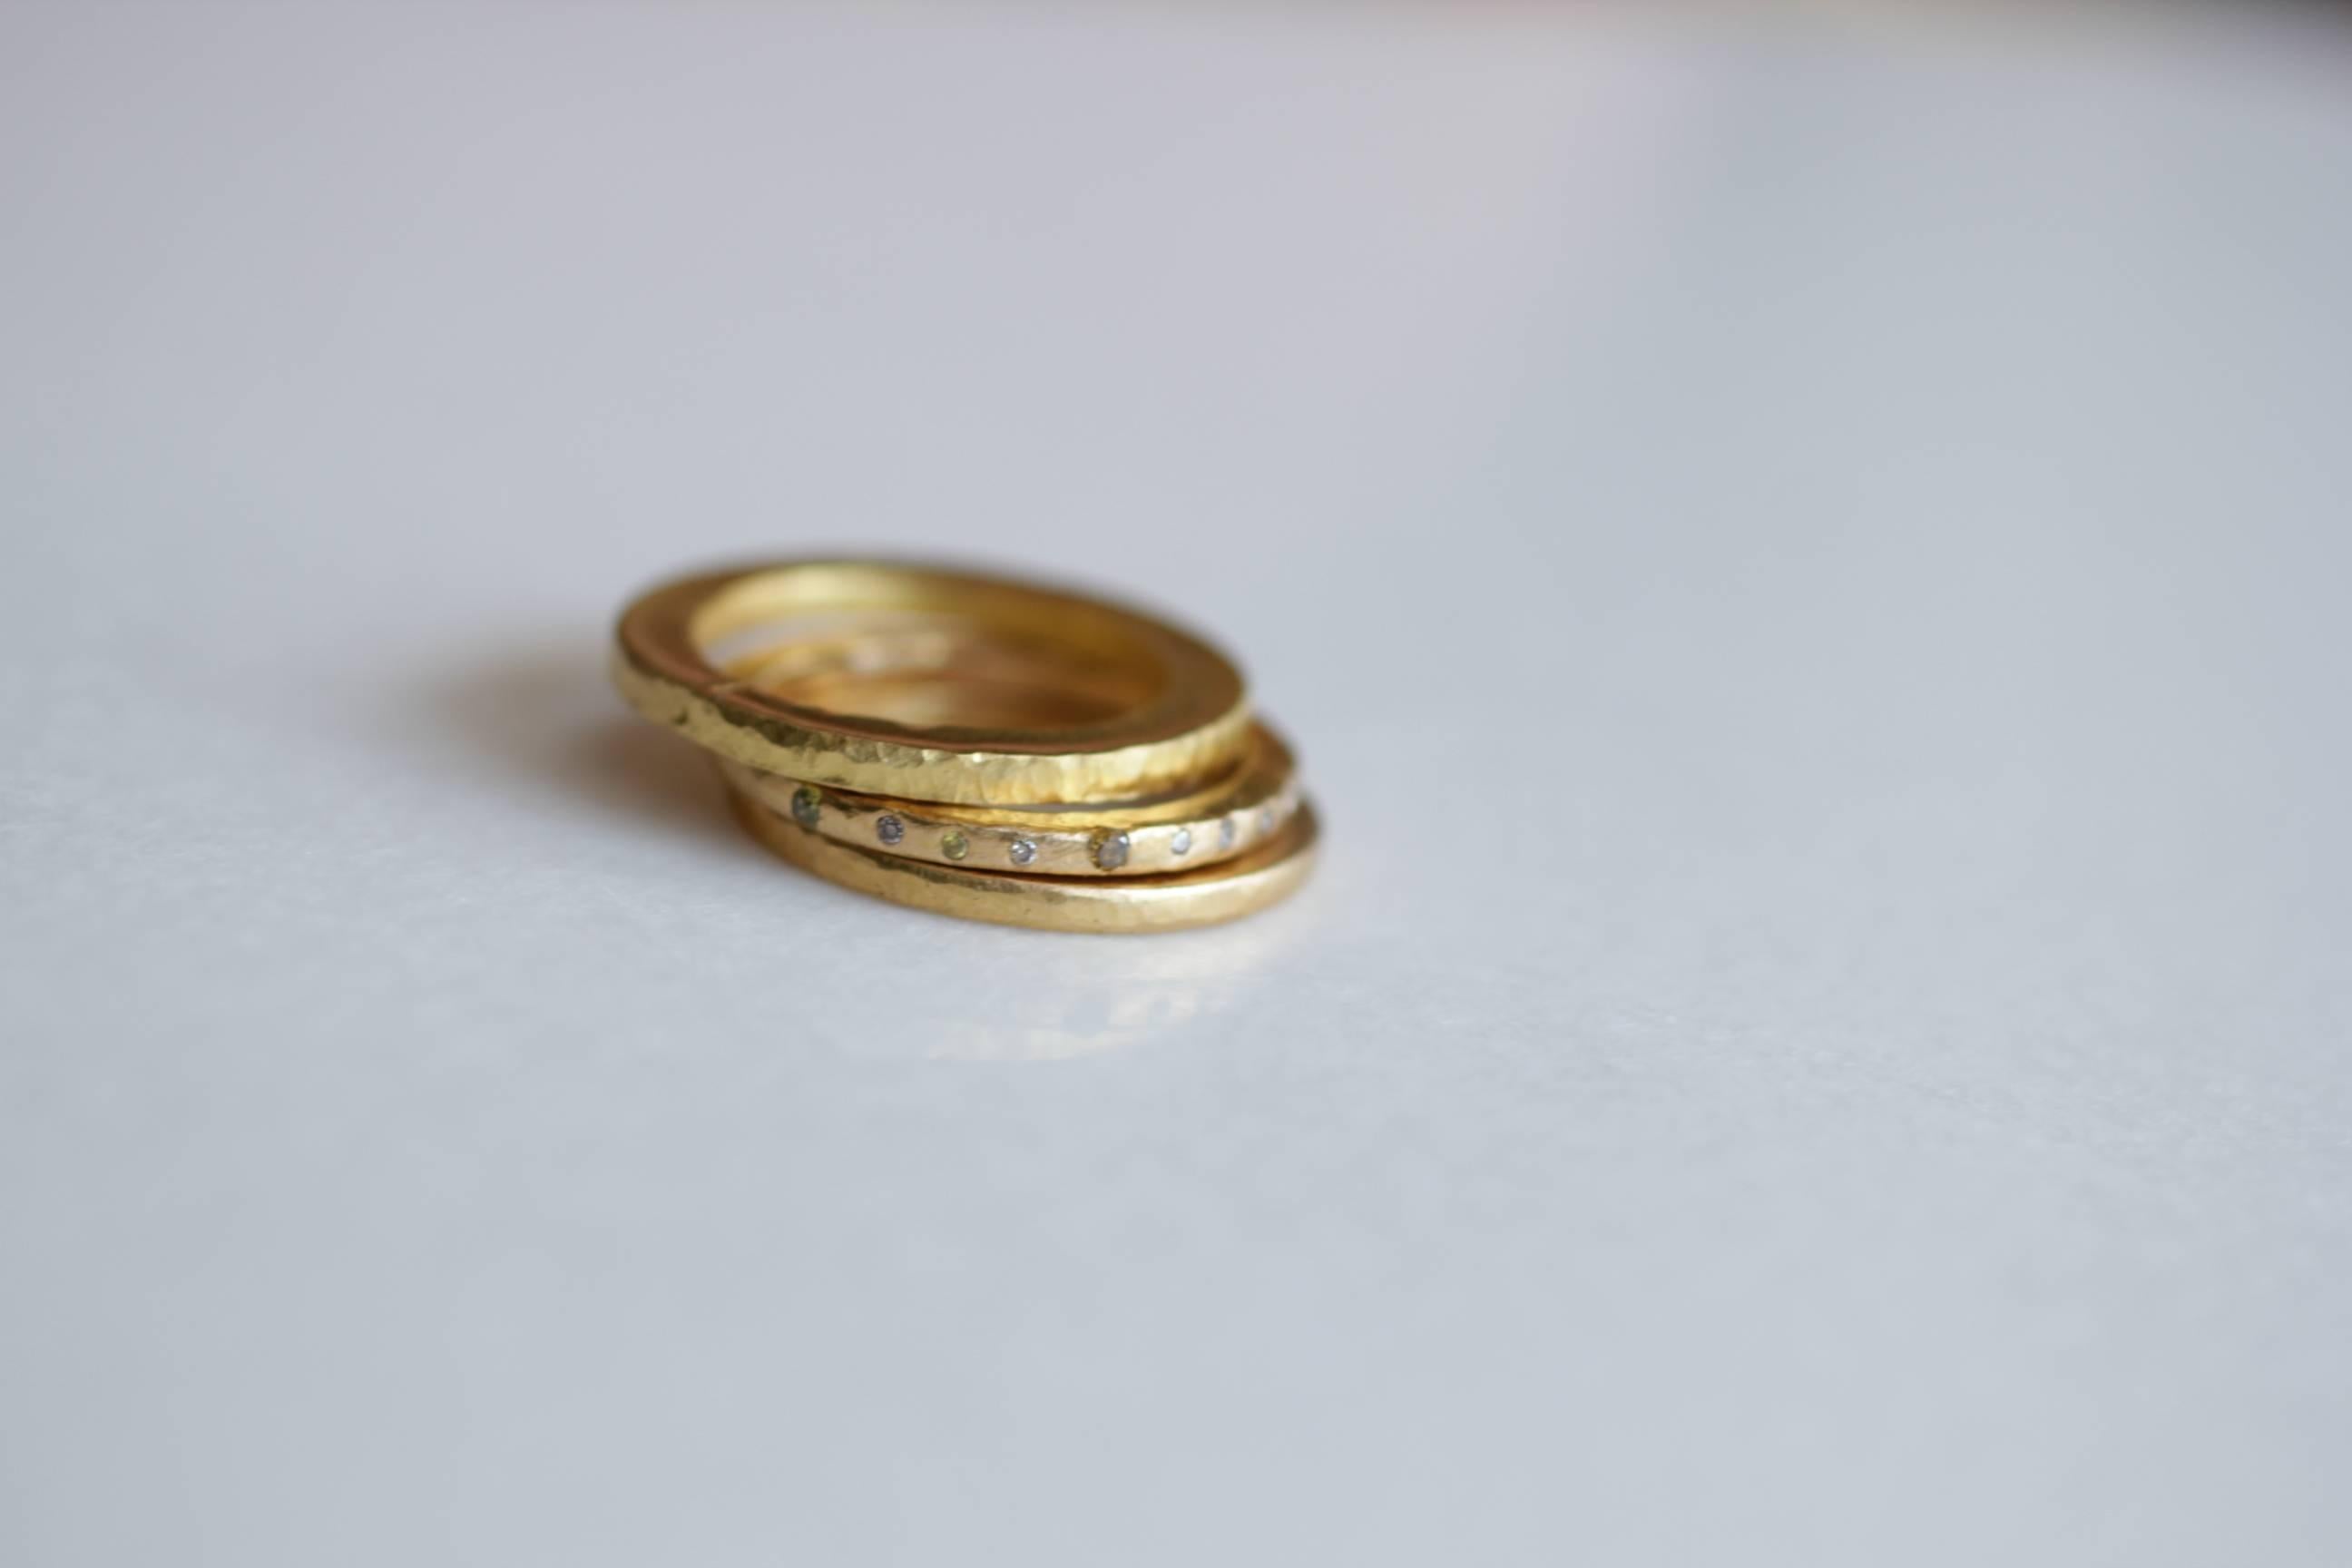 Simplicity Small Band contemporary design. This listing is one Small Wedding Band Ring in 21k gold. Can also be worn as a stacking ring.

Pictured here, the Small Wedding Band Ring is combined with Medium Disk ring and a Small Band set with